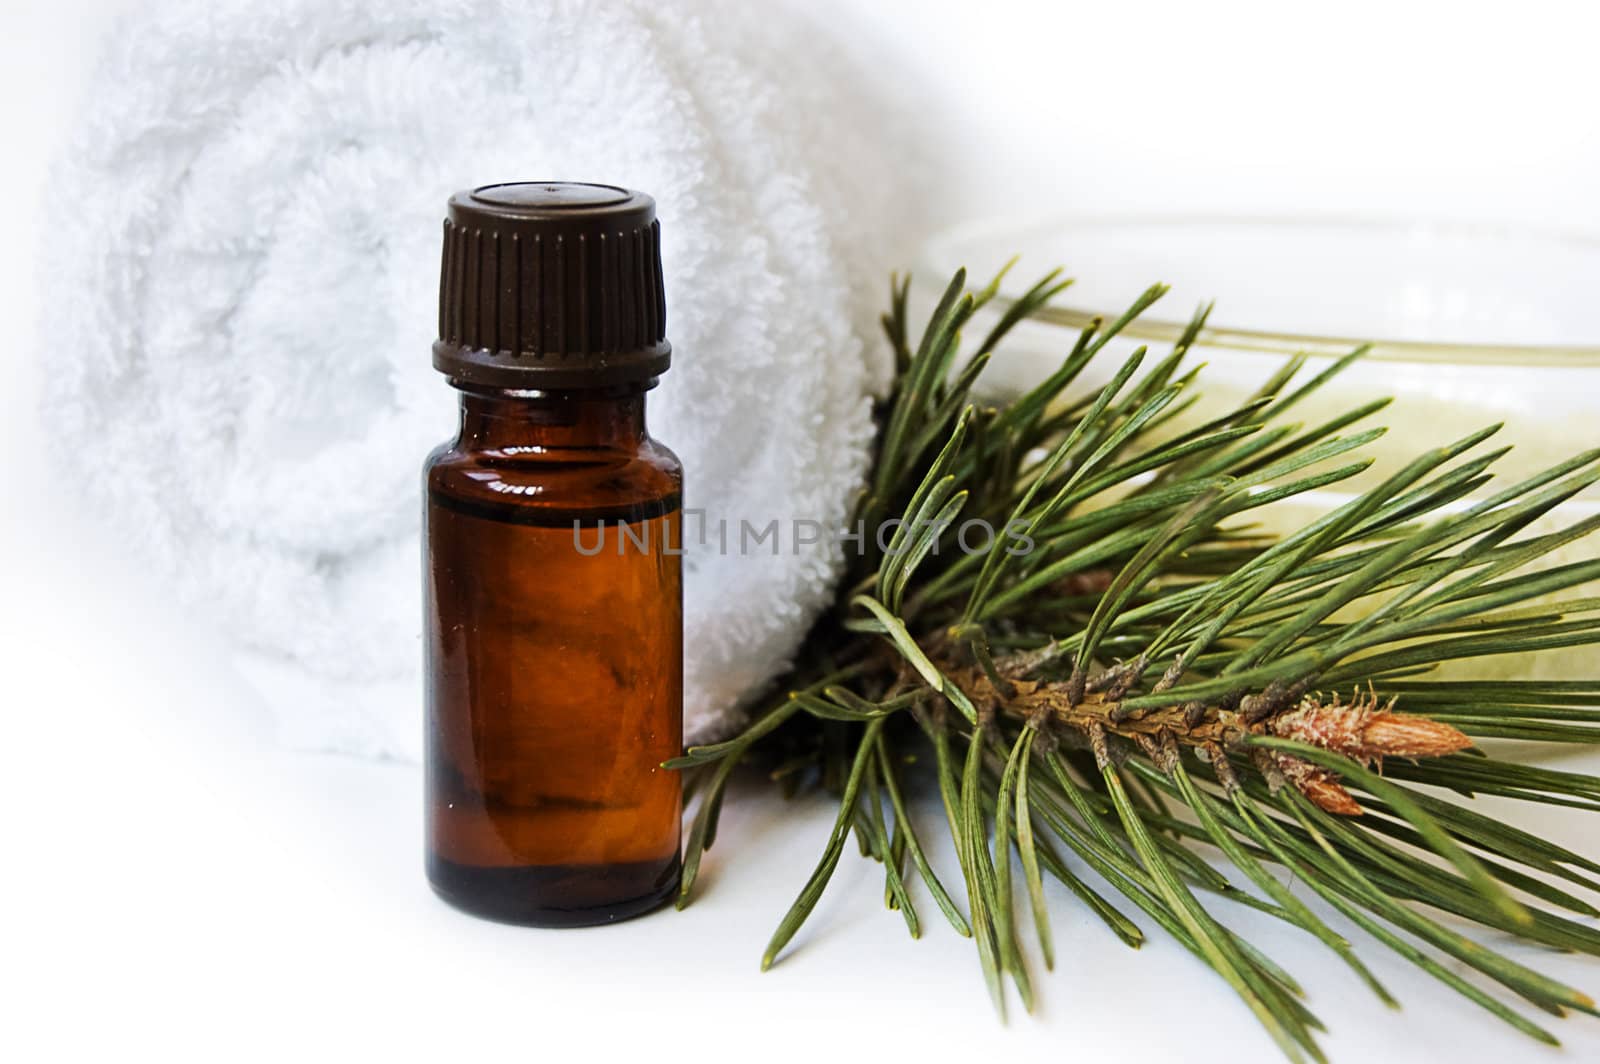 Bottle of fir tree oil and towel over white